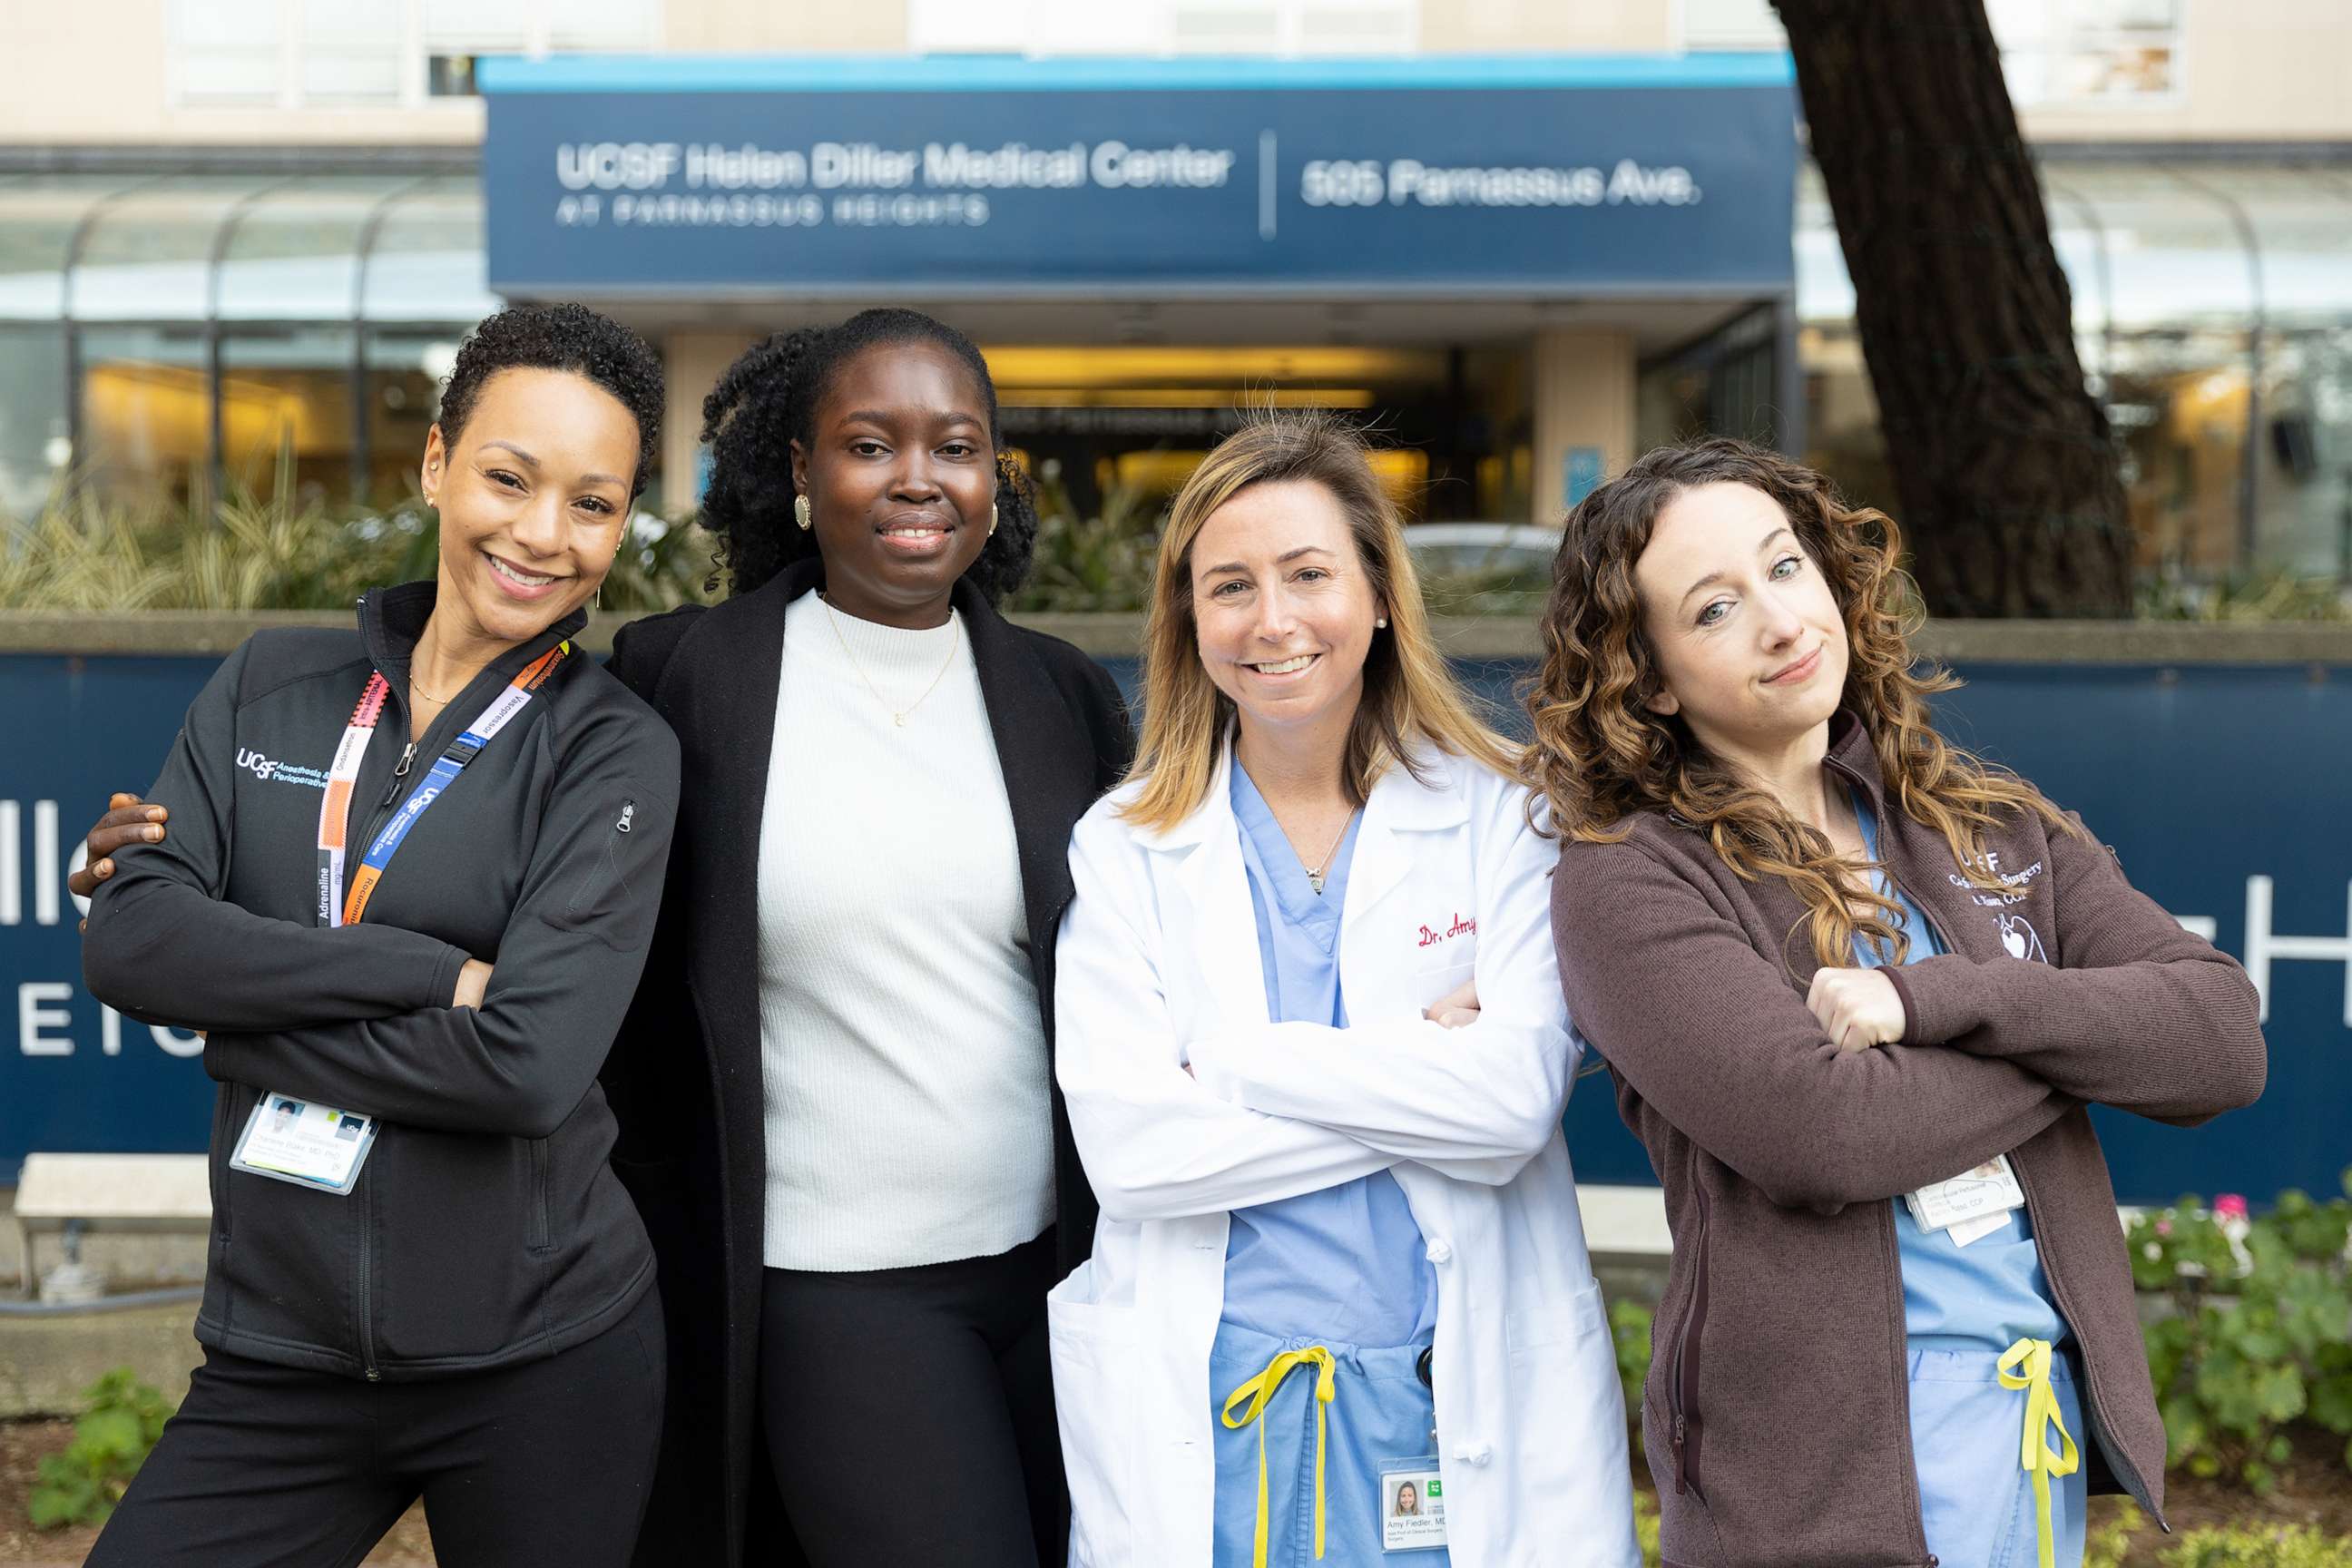 PHOTO: Dr. Charlene Blake (far left), Dr. Amy Fiedler (third from left), and perfusionist Ashley Risso (far right) were part of an all-women team that performed a heart transplant for patient Fatou Gaye (second from left).